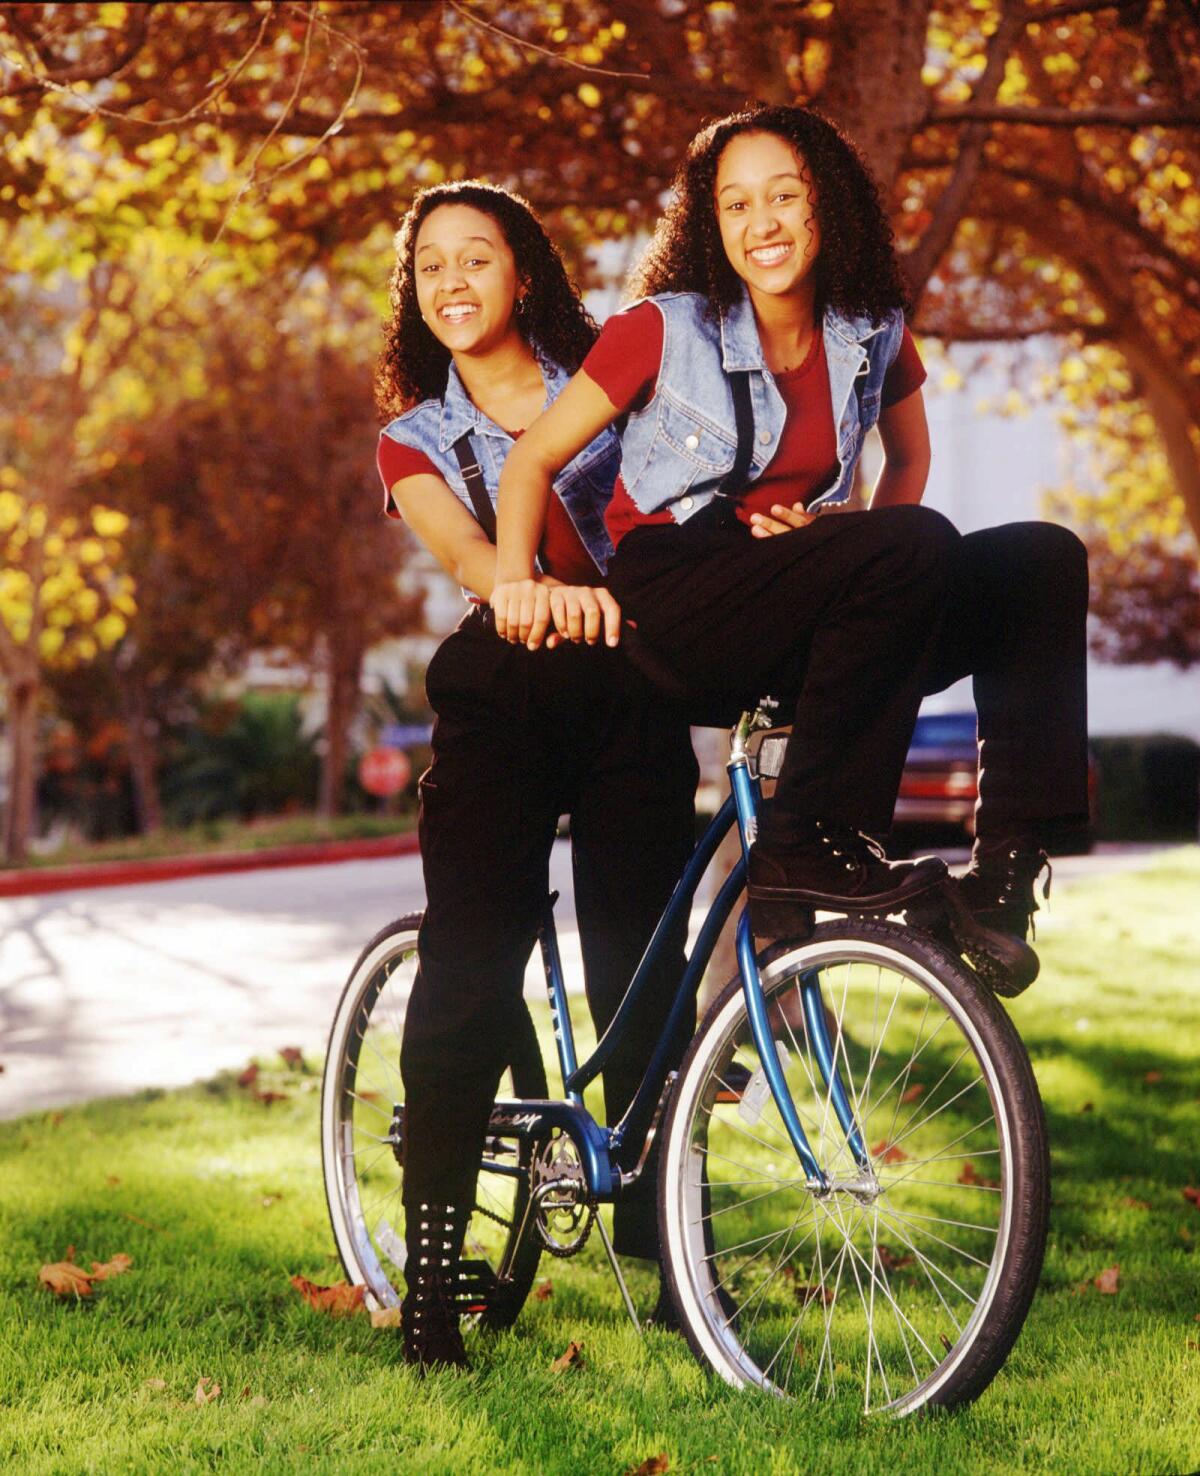 Identical twins on a bicycle in the series "Sister, Sister"